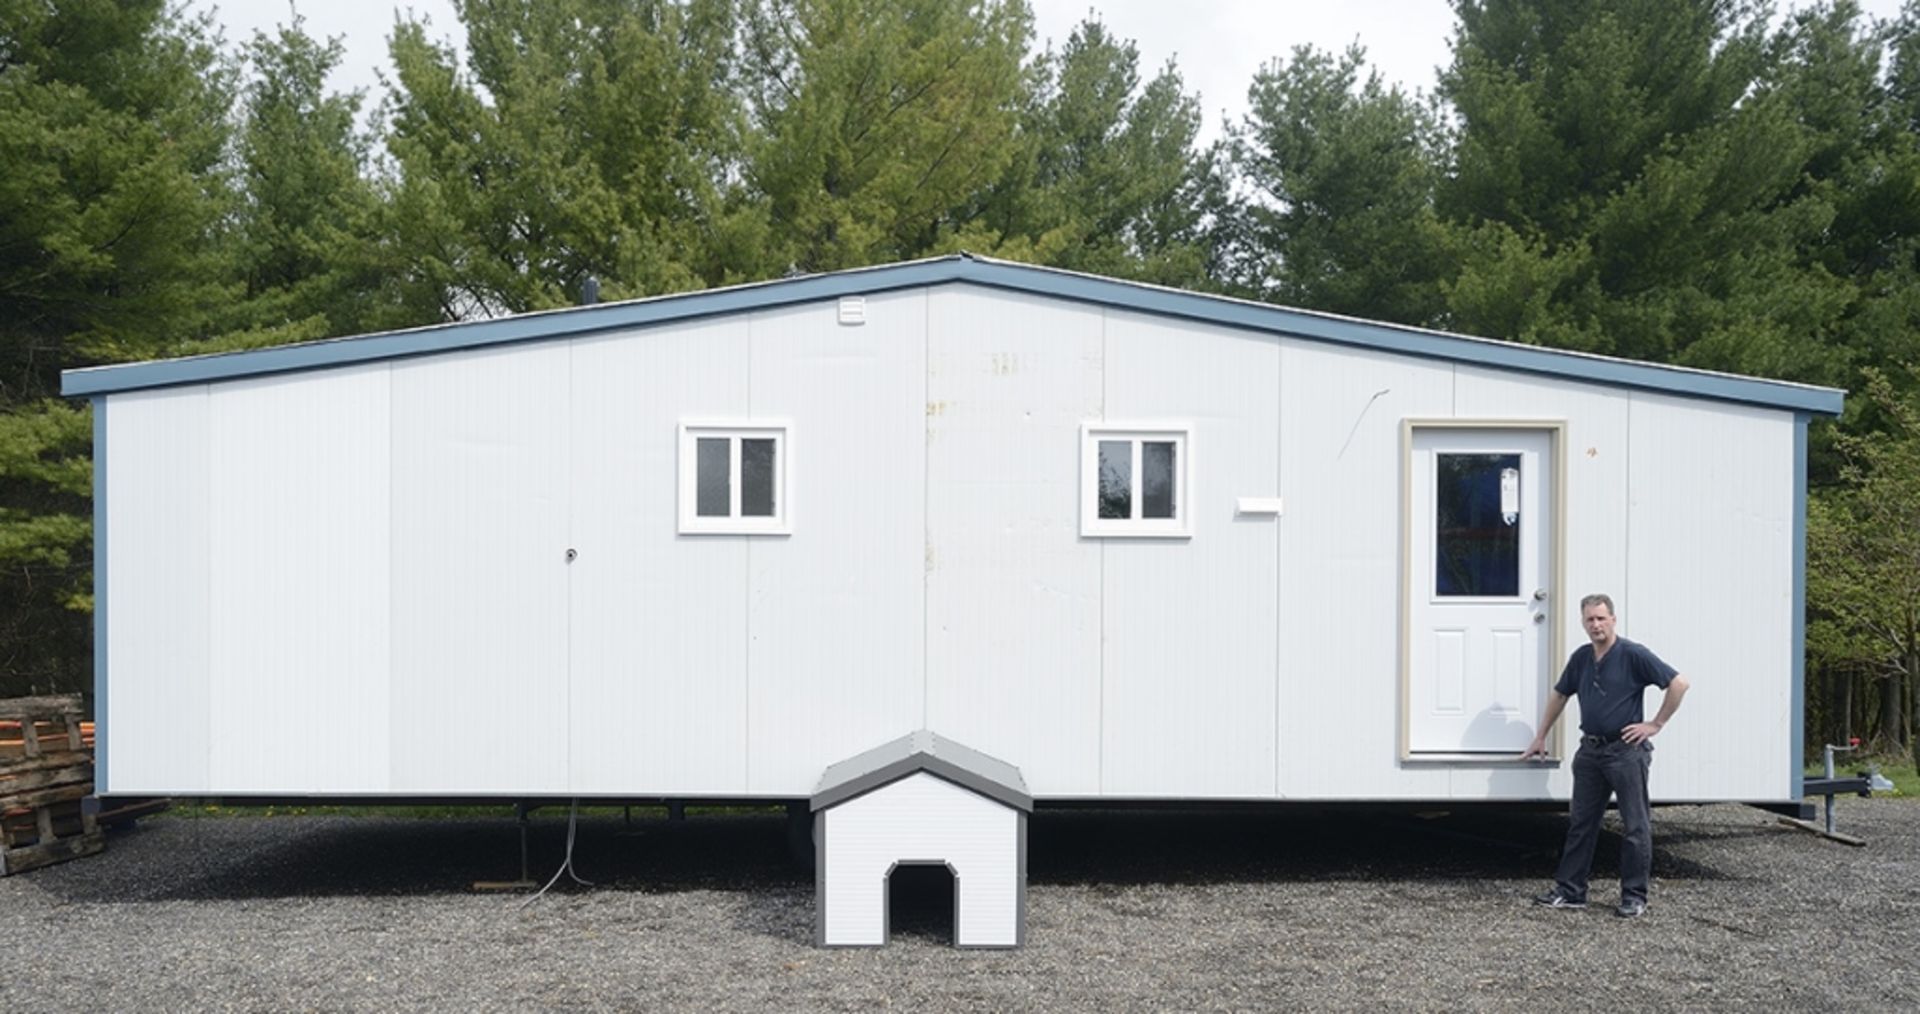 BRAND NEW 14' X 34' TIMBERSTRUC MOBILE HOME - Image 3 of 19